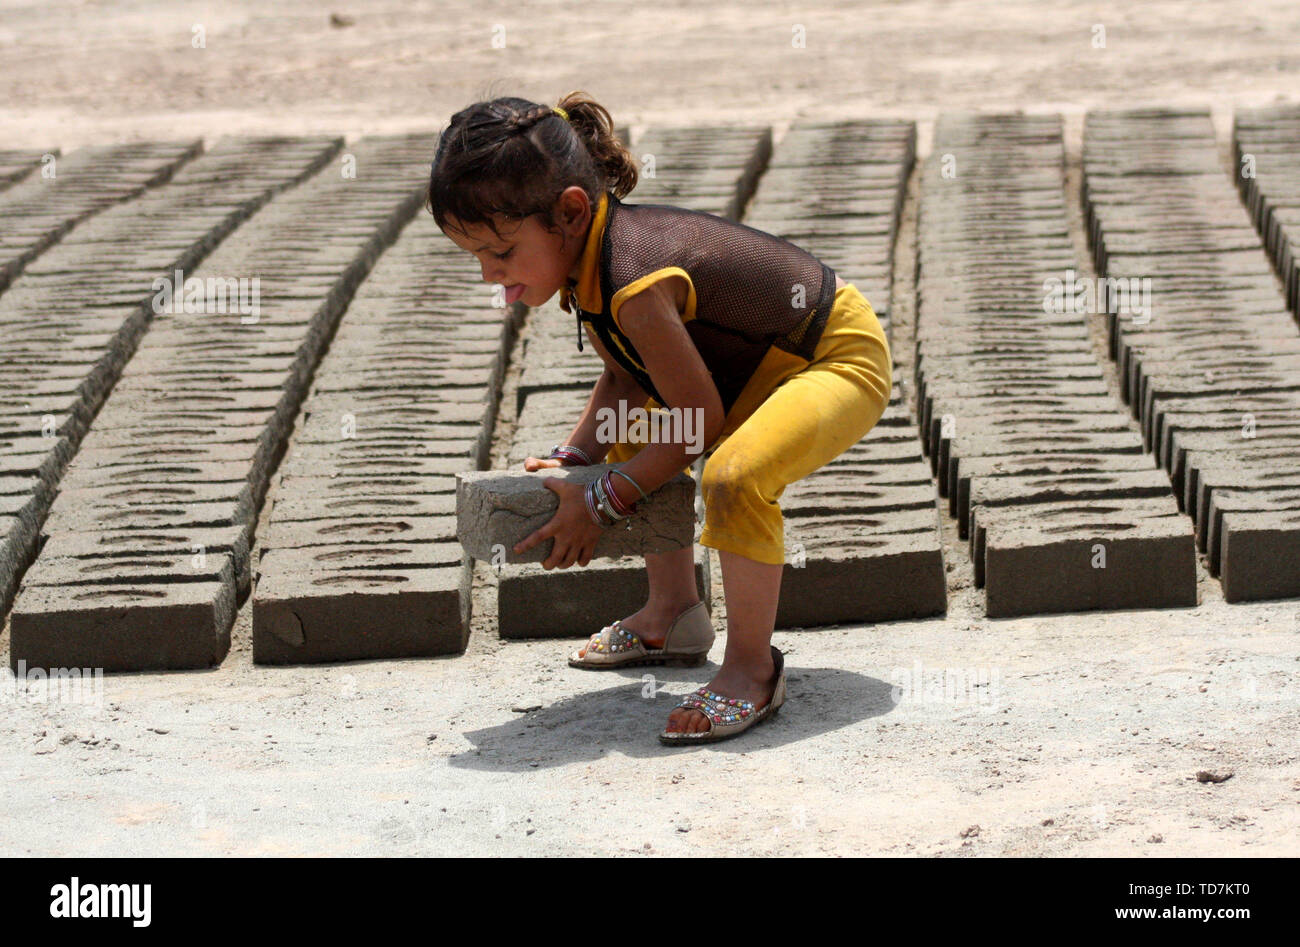 Beijing Pakistan 12th June 19 A Girl Works At A Brick Factory On The Outskirts Of Peshawar Pakistan On June 12 19 The World Day Against Child Labor Is Observed On June